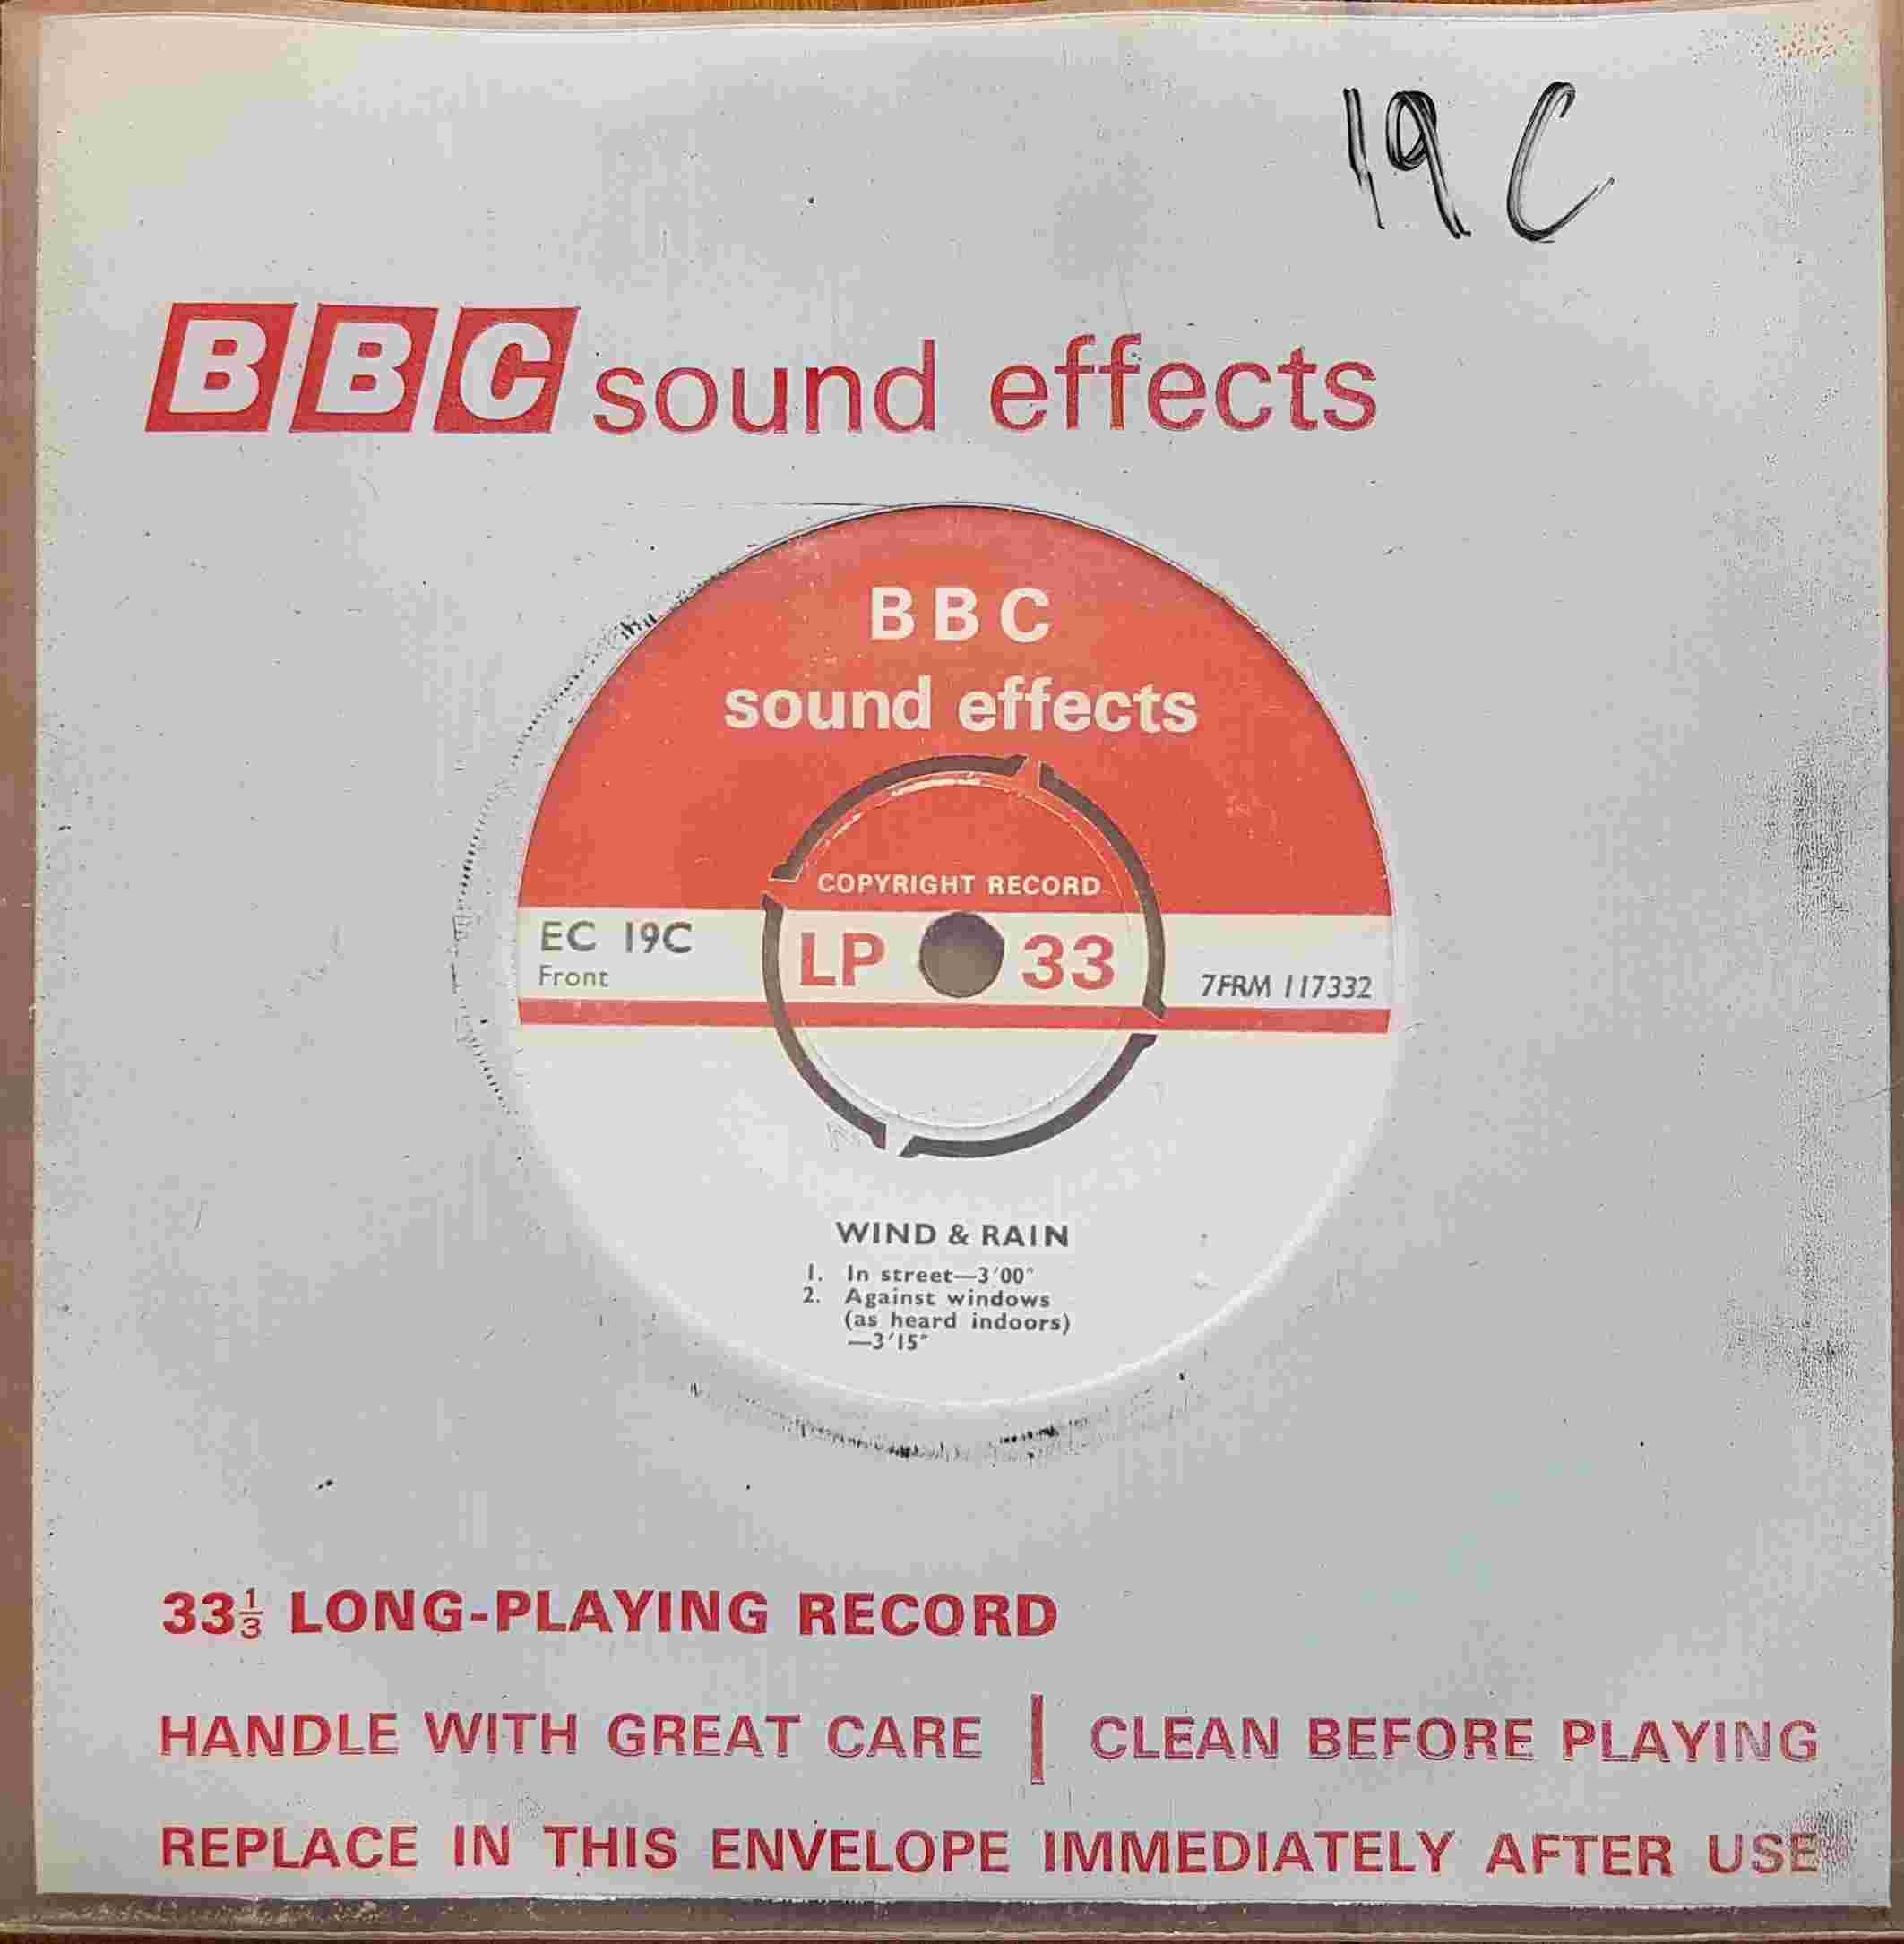 Picture of EC 19C Rain by artist Not registered from the BBC singles - Records and Tapes library